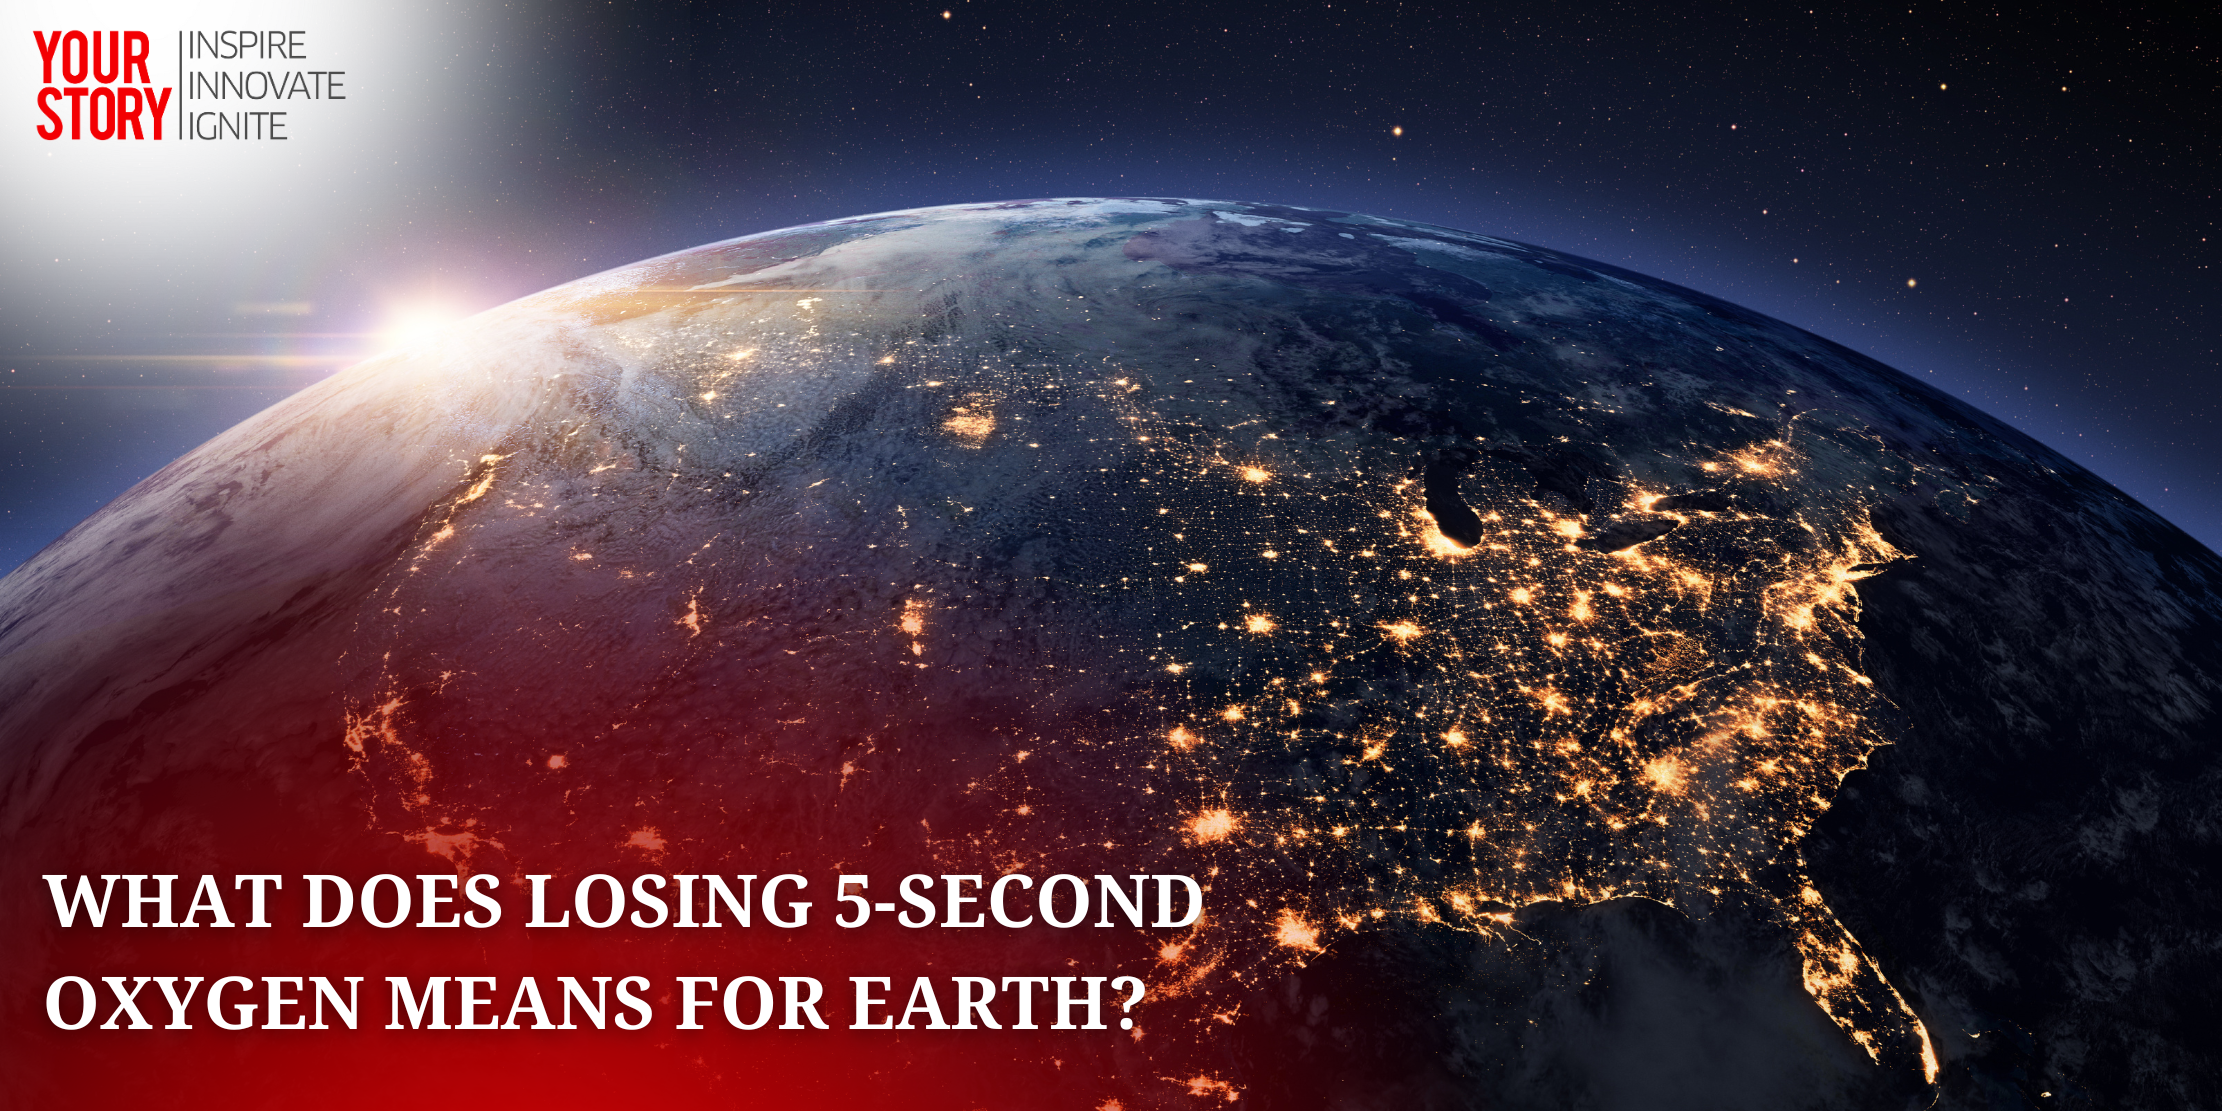 ⁠What Does Losing 5-Second Oxygen Means for Earth?